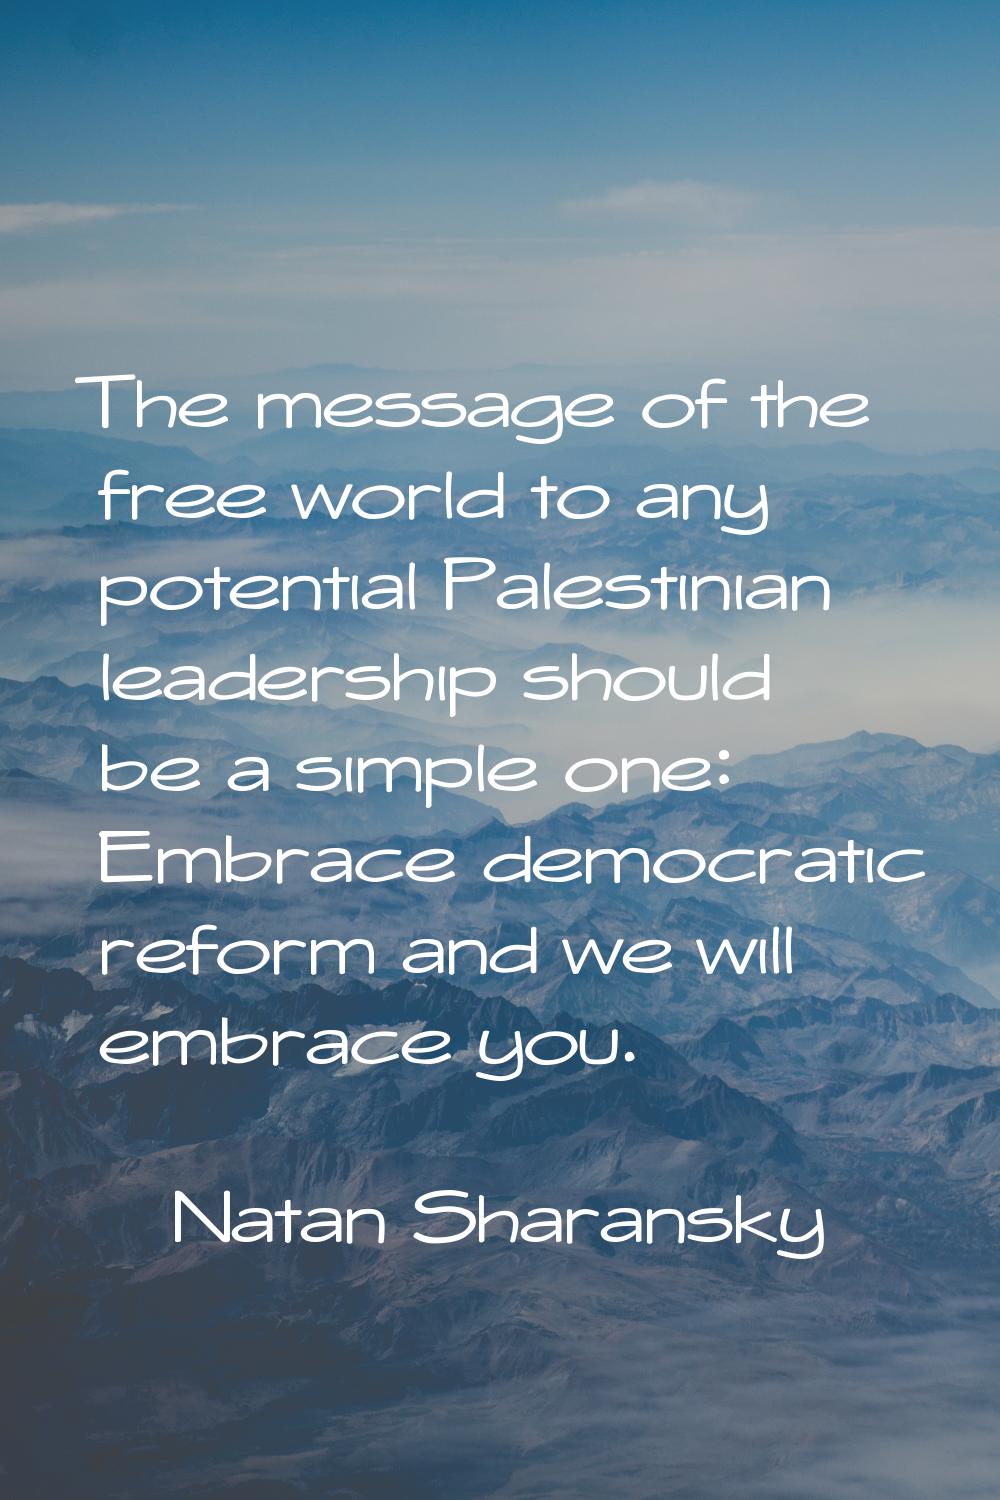 The message of the free world to any potential Palestinian leadership should be a simple one: Embra